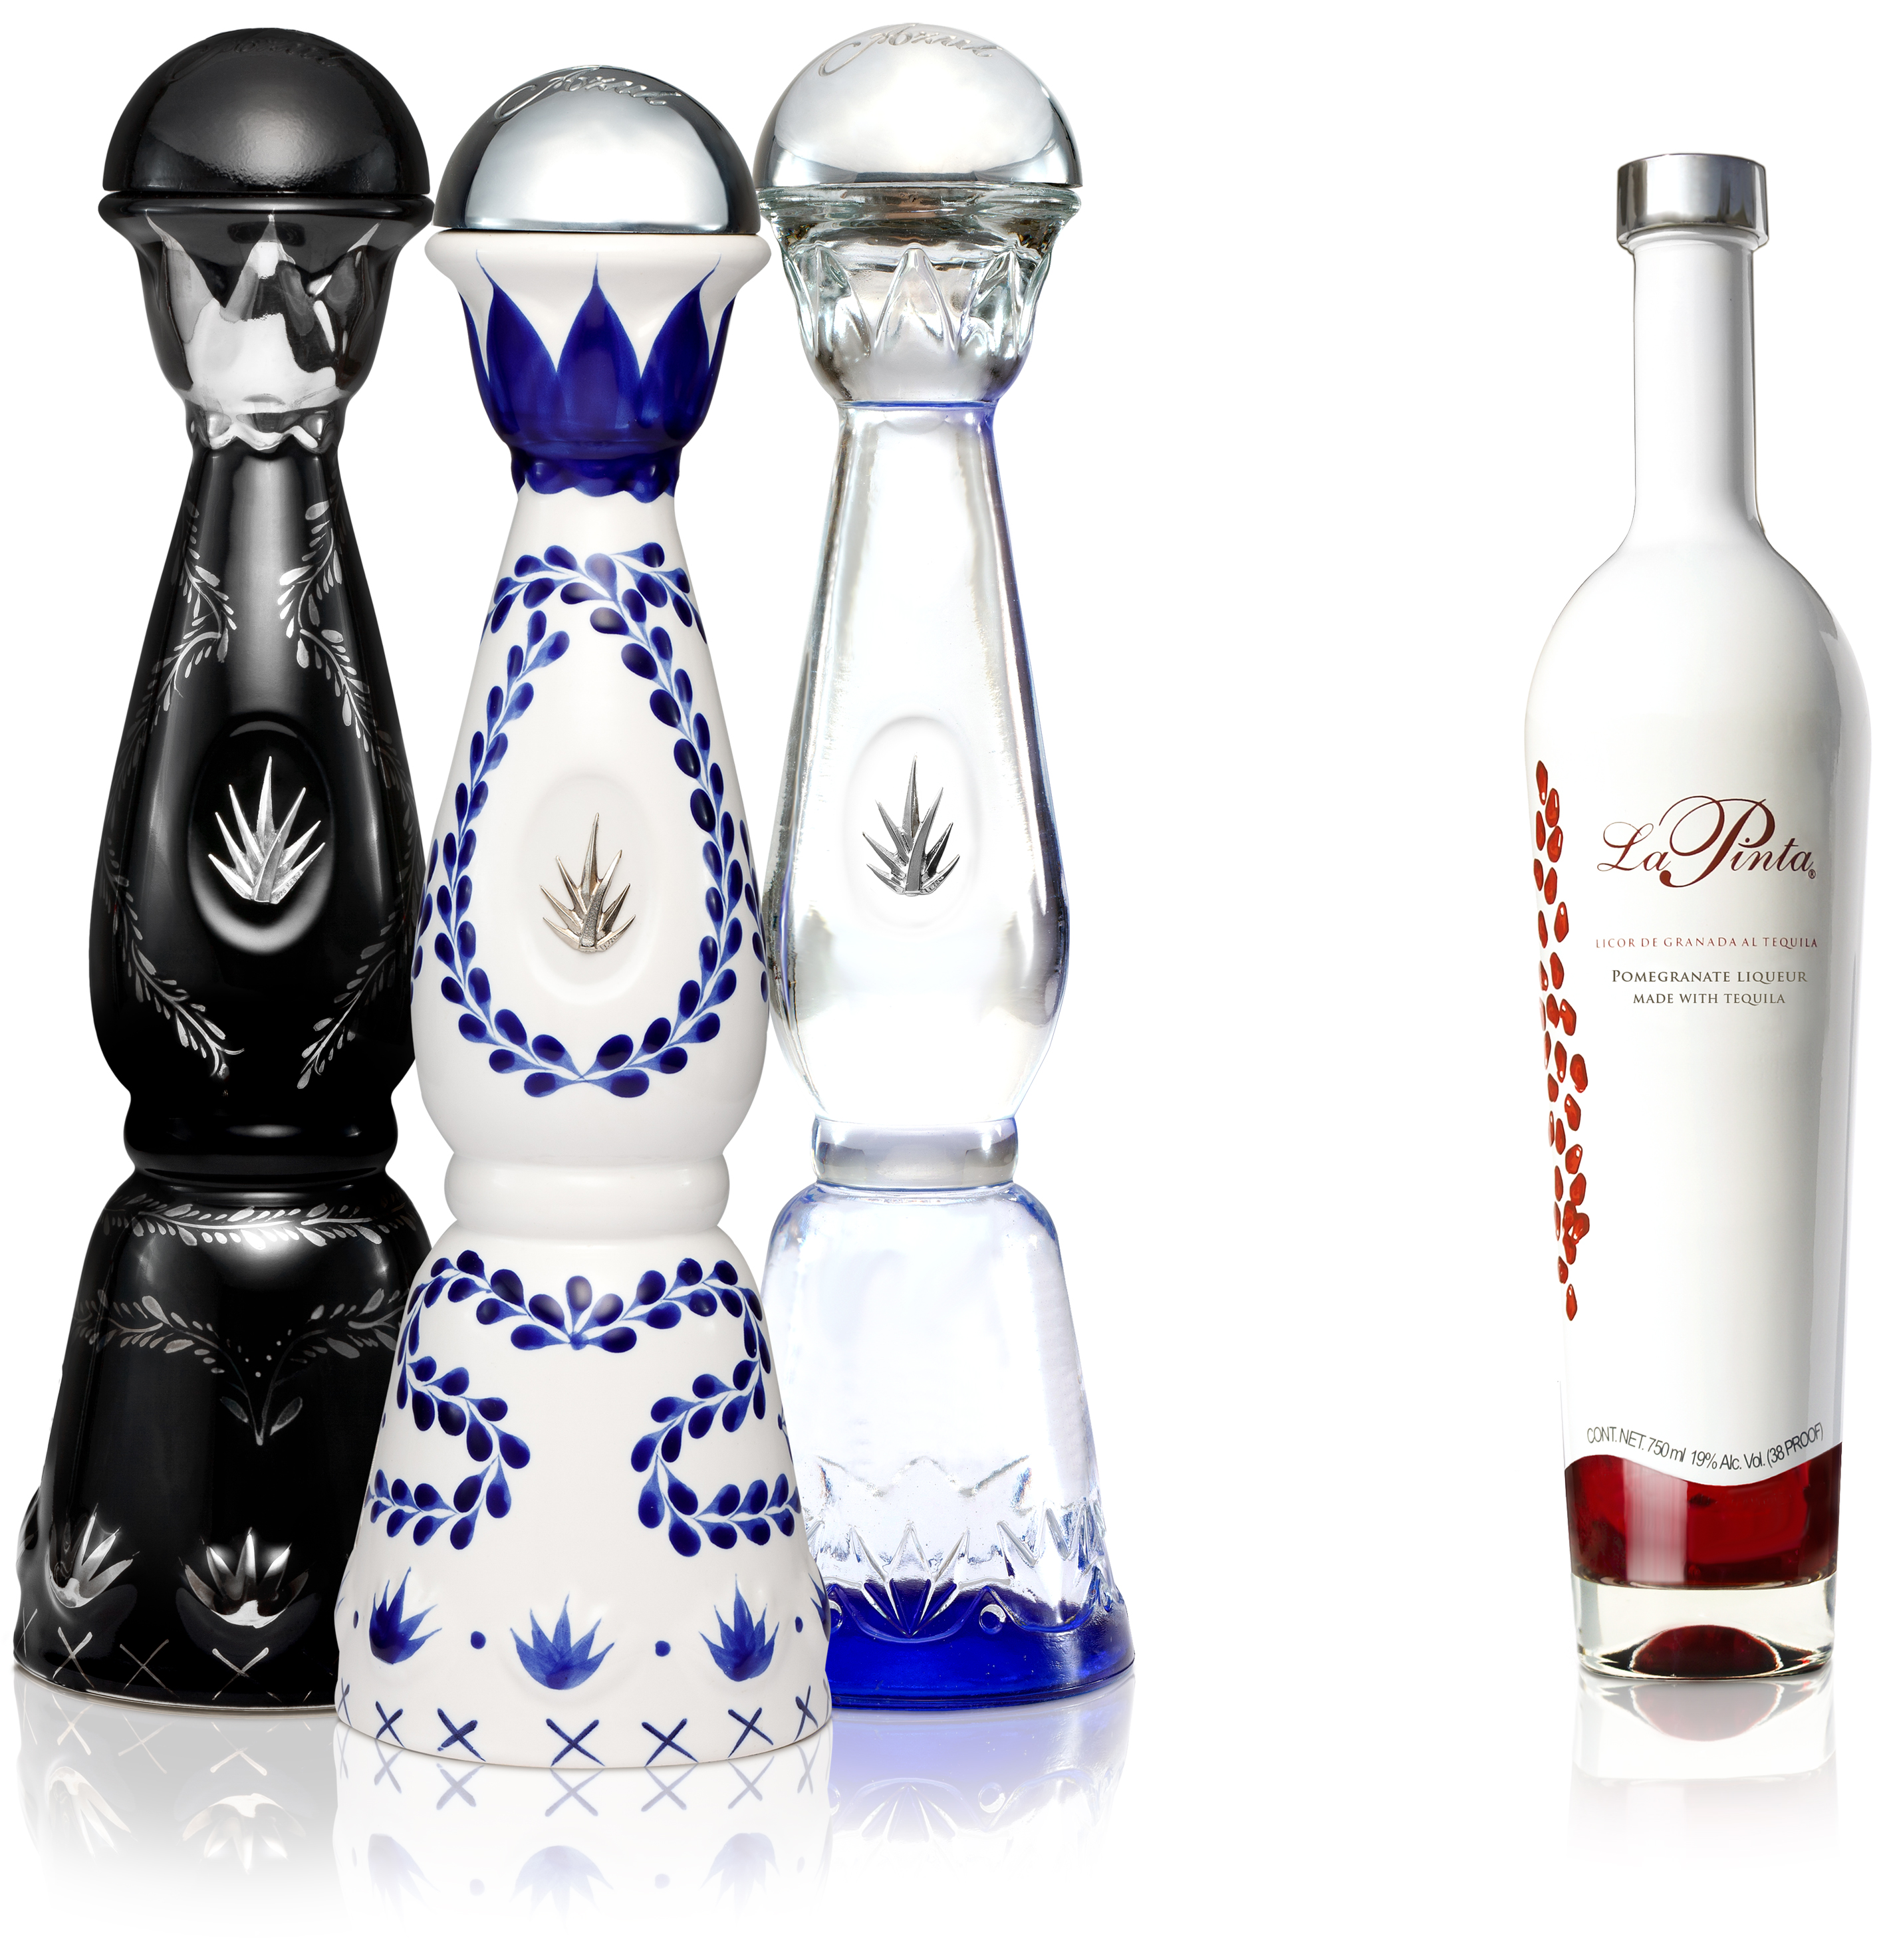 Tequila Casino Azul Limited Edition Price